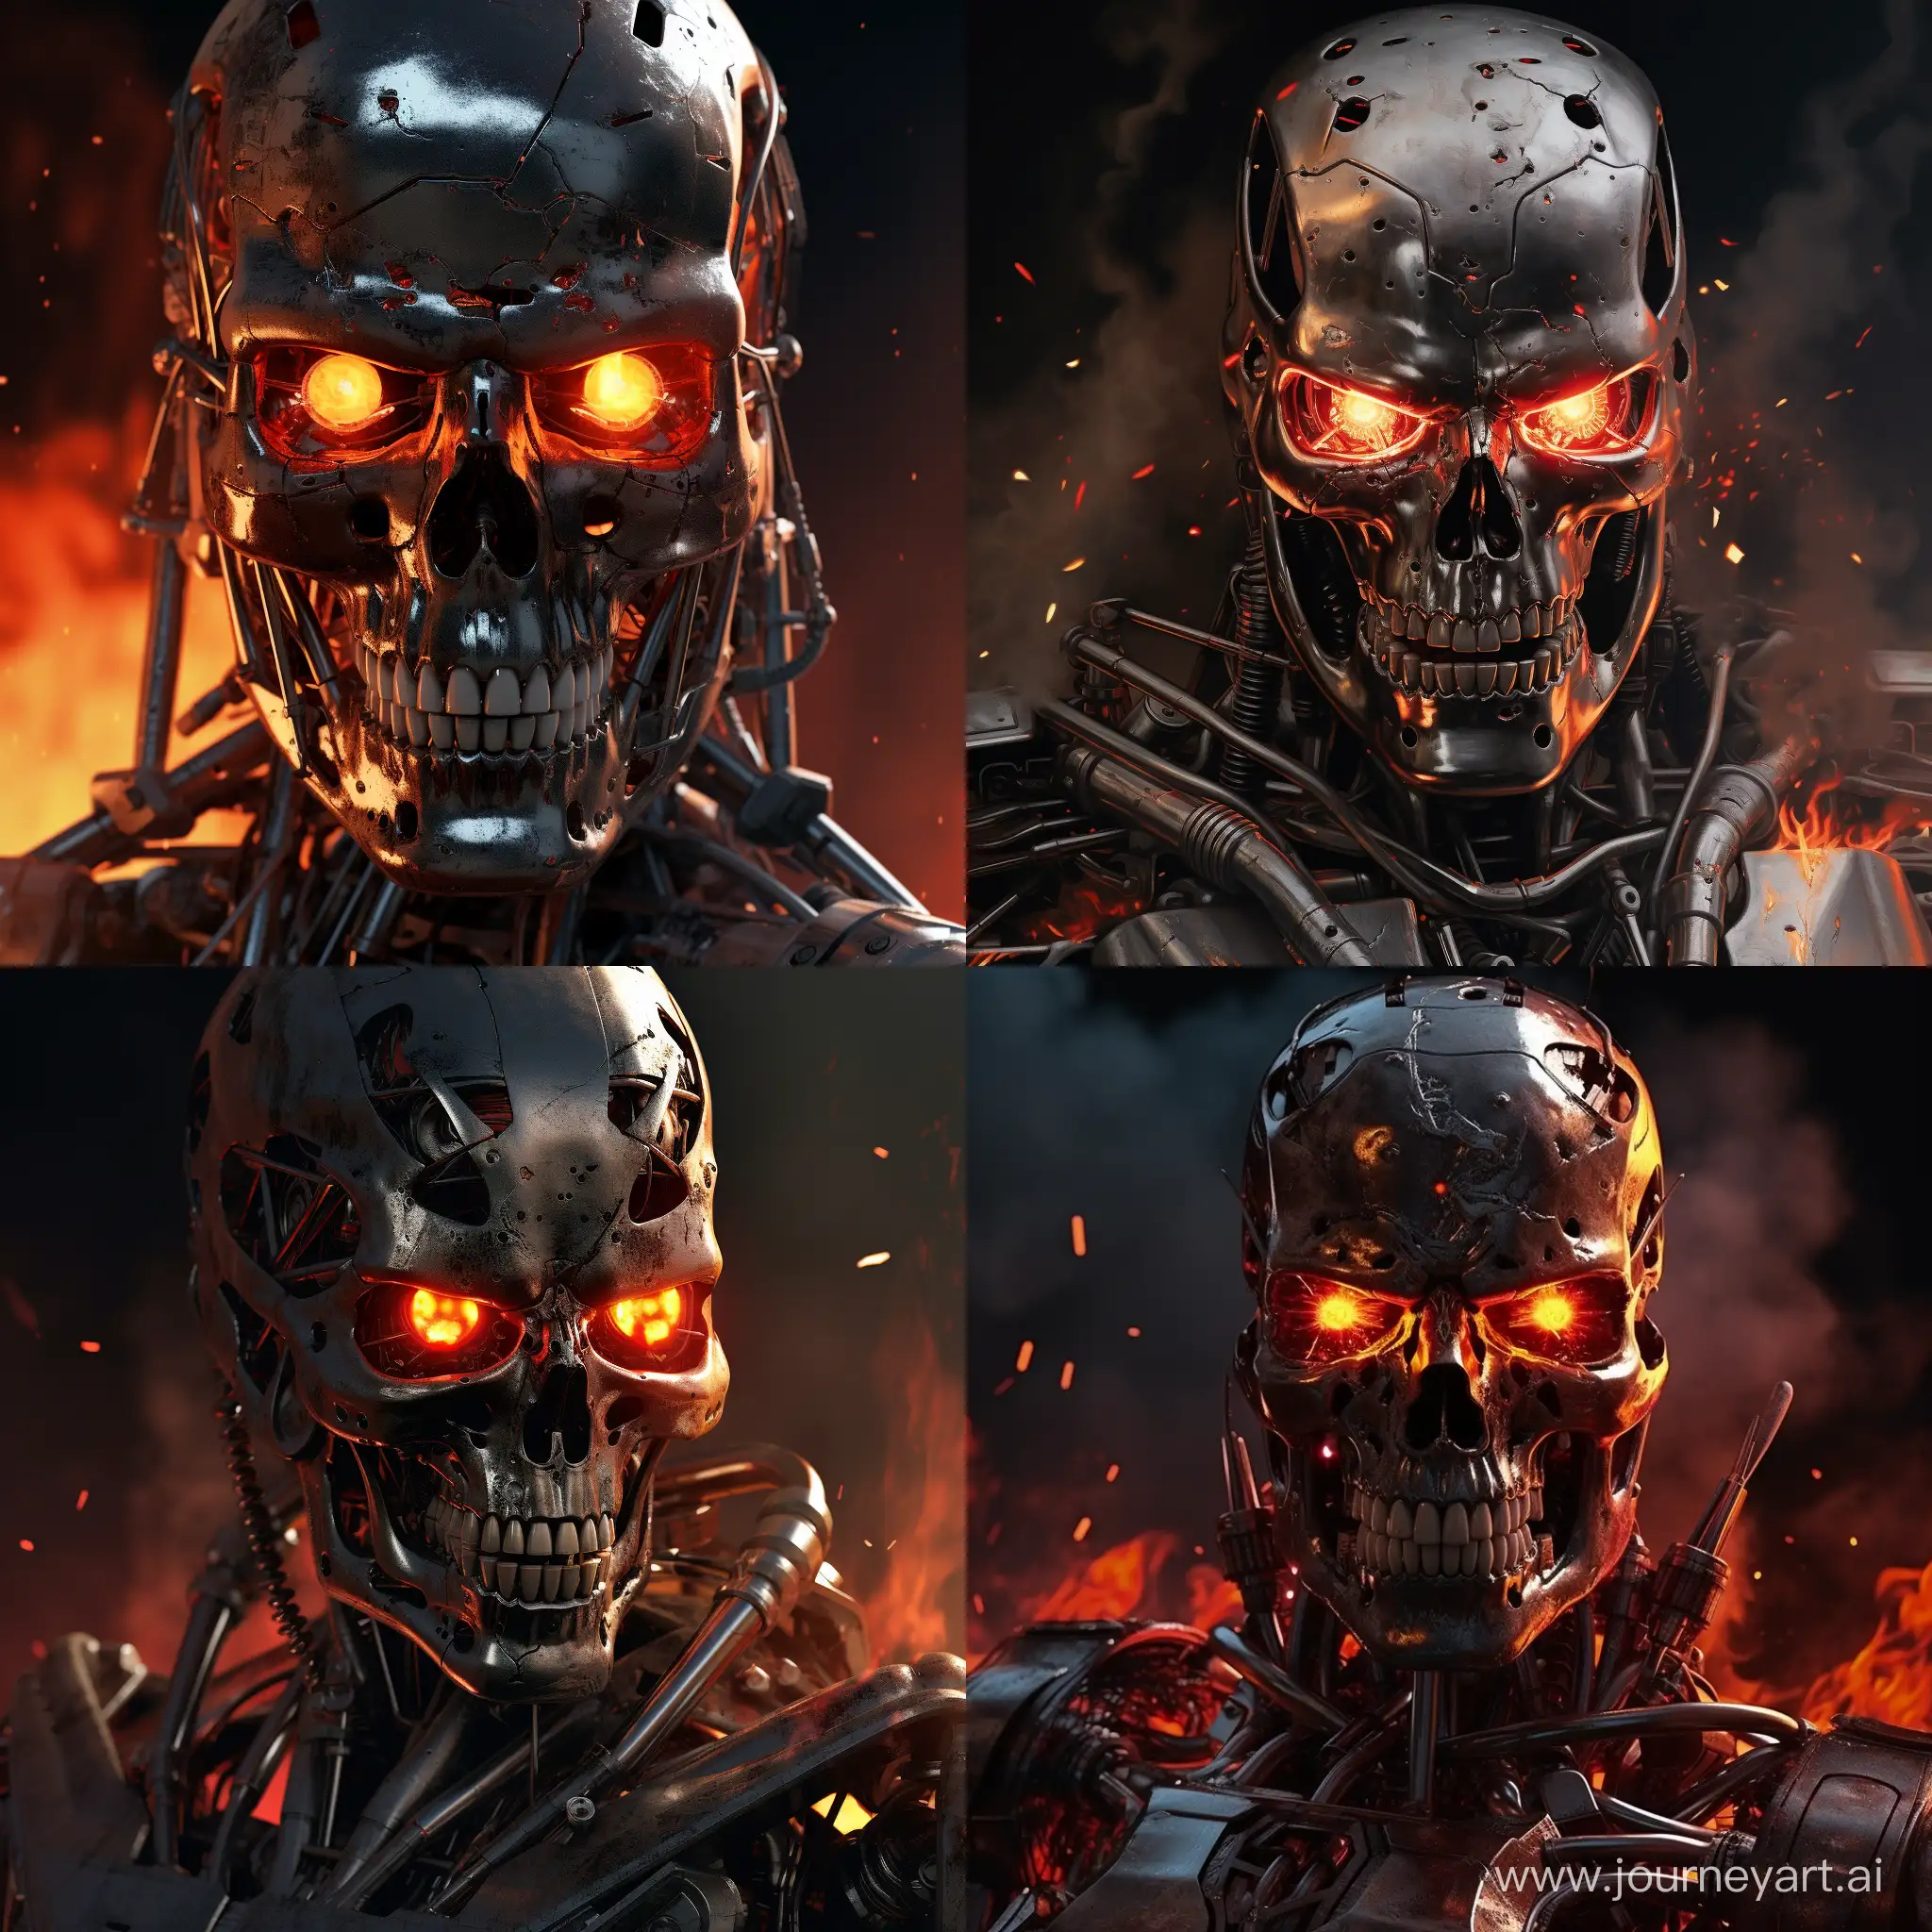 Terminator-Robot-in-Intense-Battle-with-Fiery-Explosions